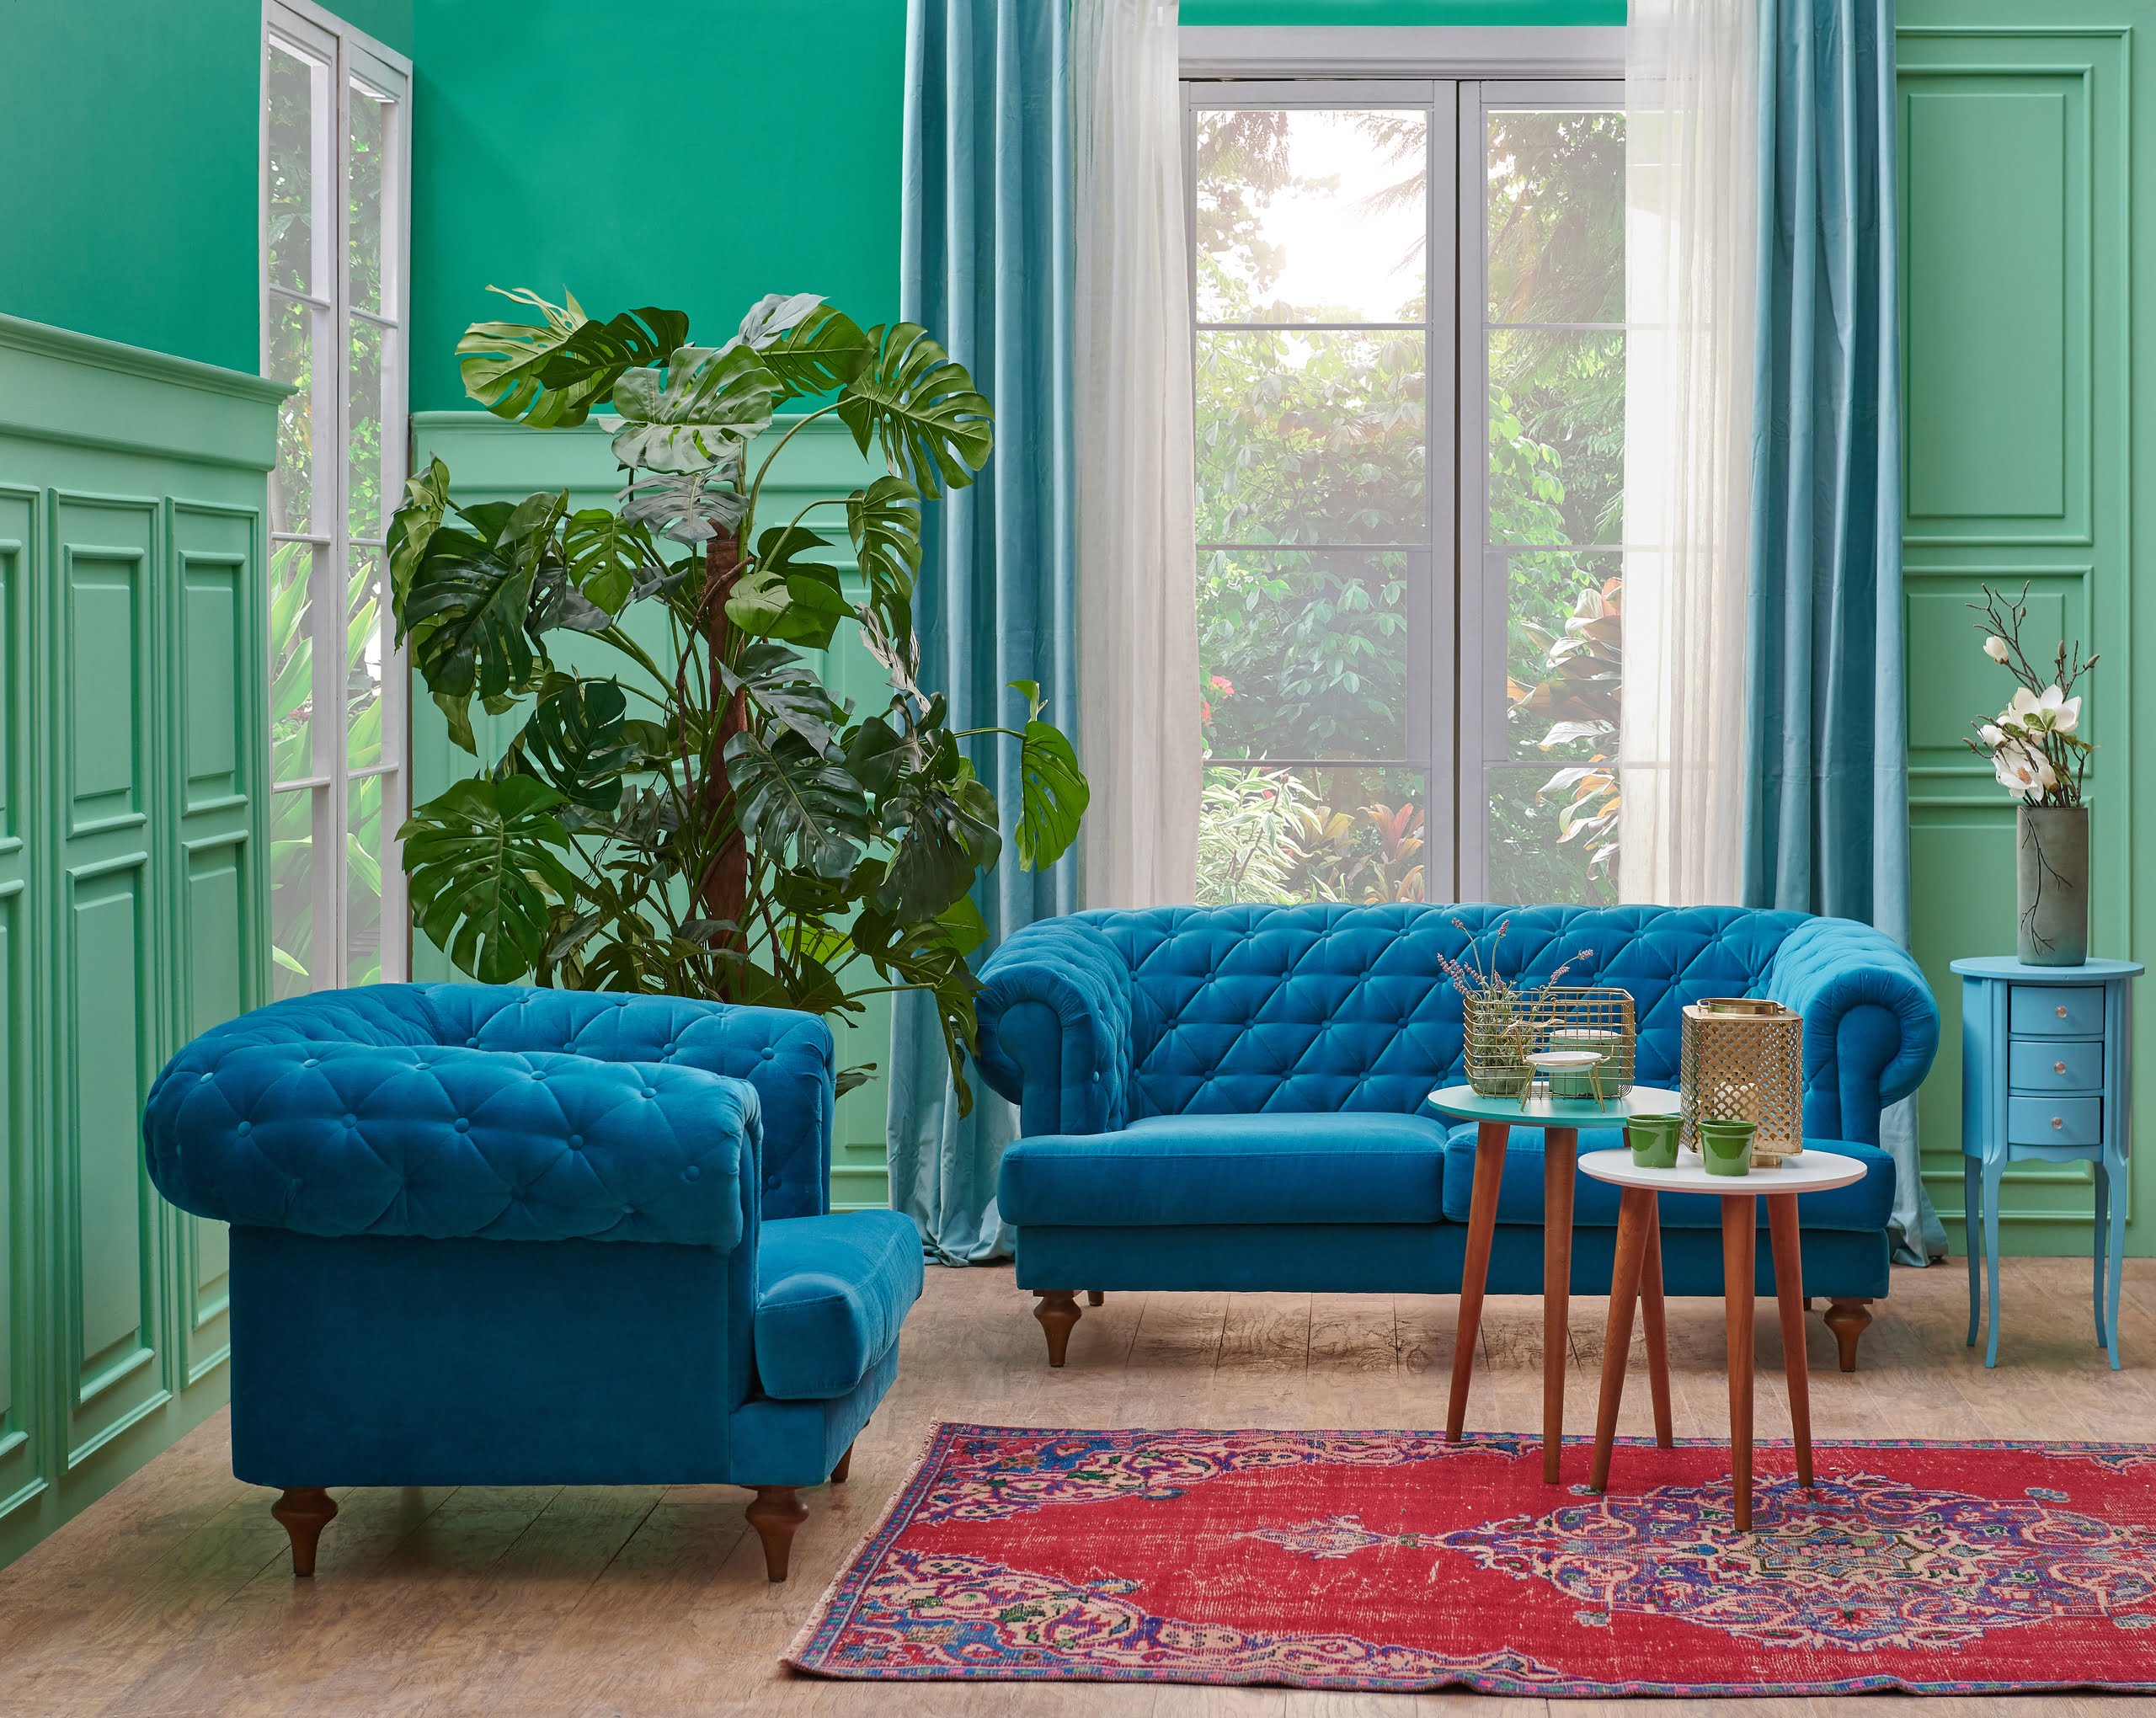 Use Of Teal In Living Room